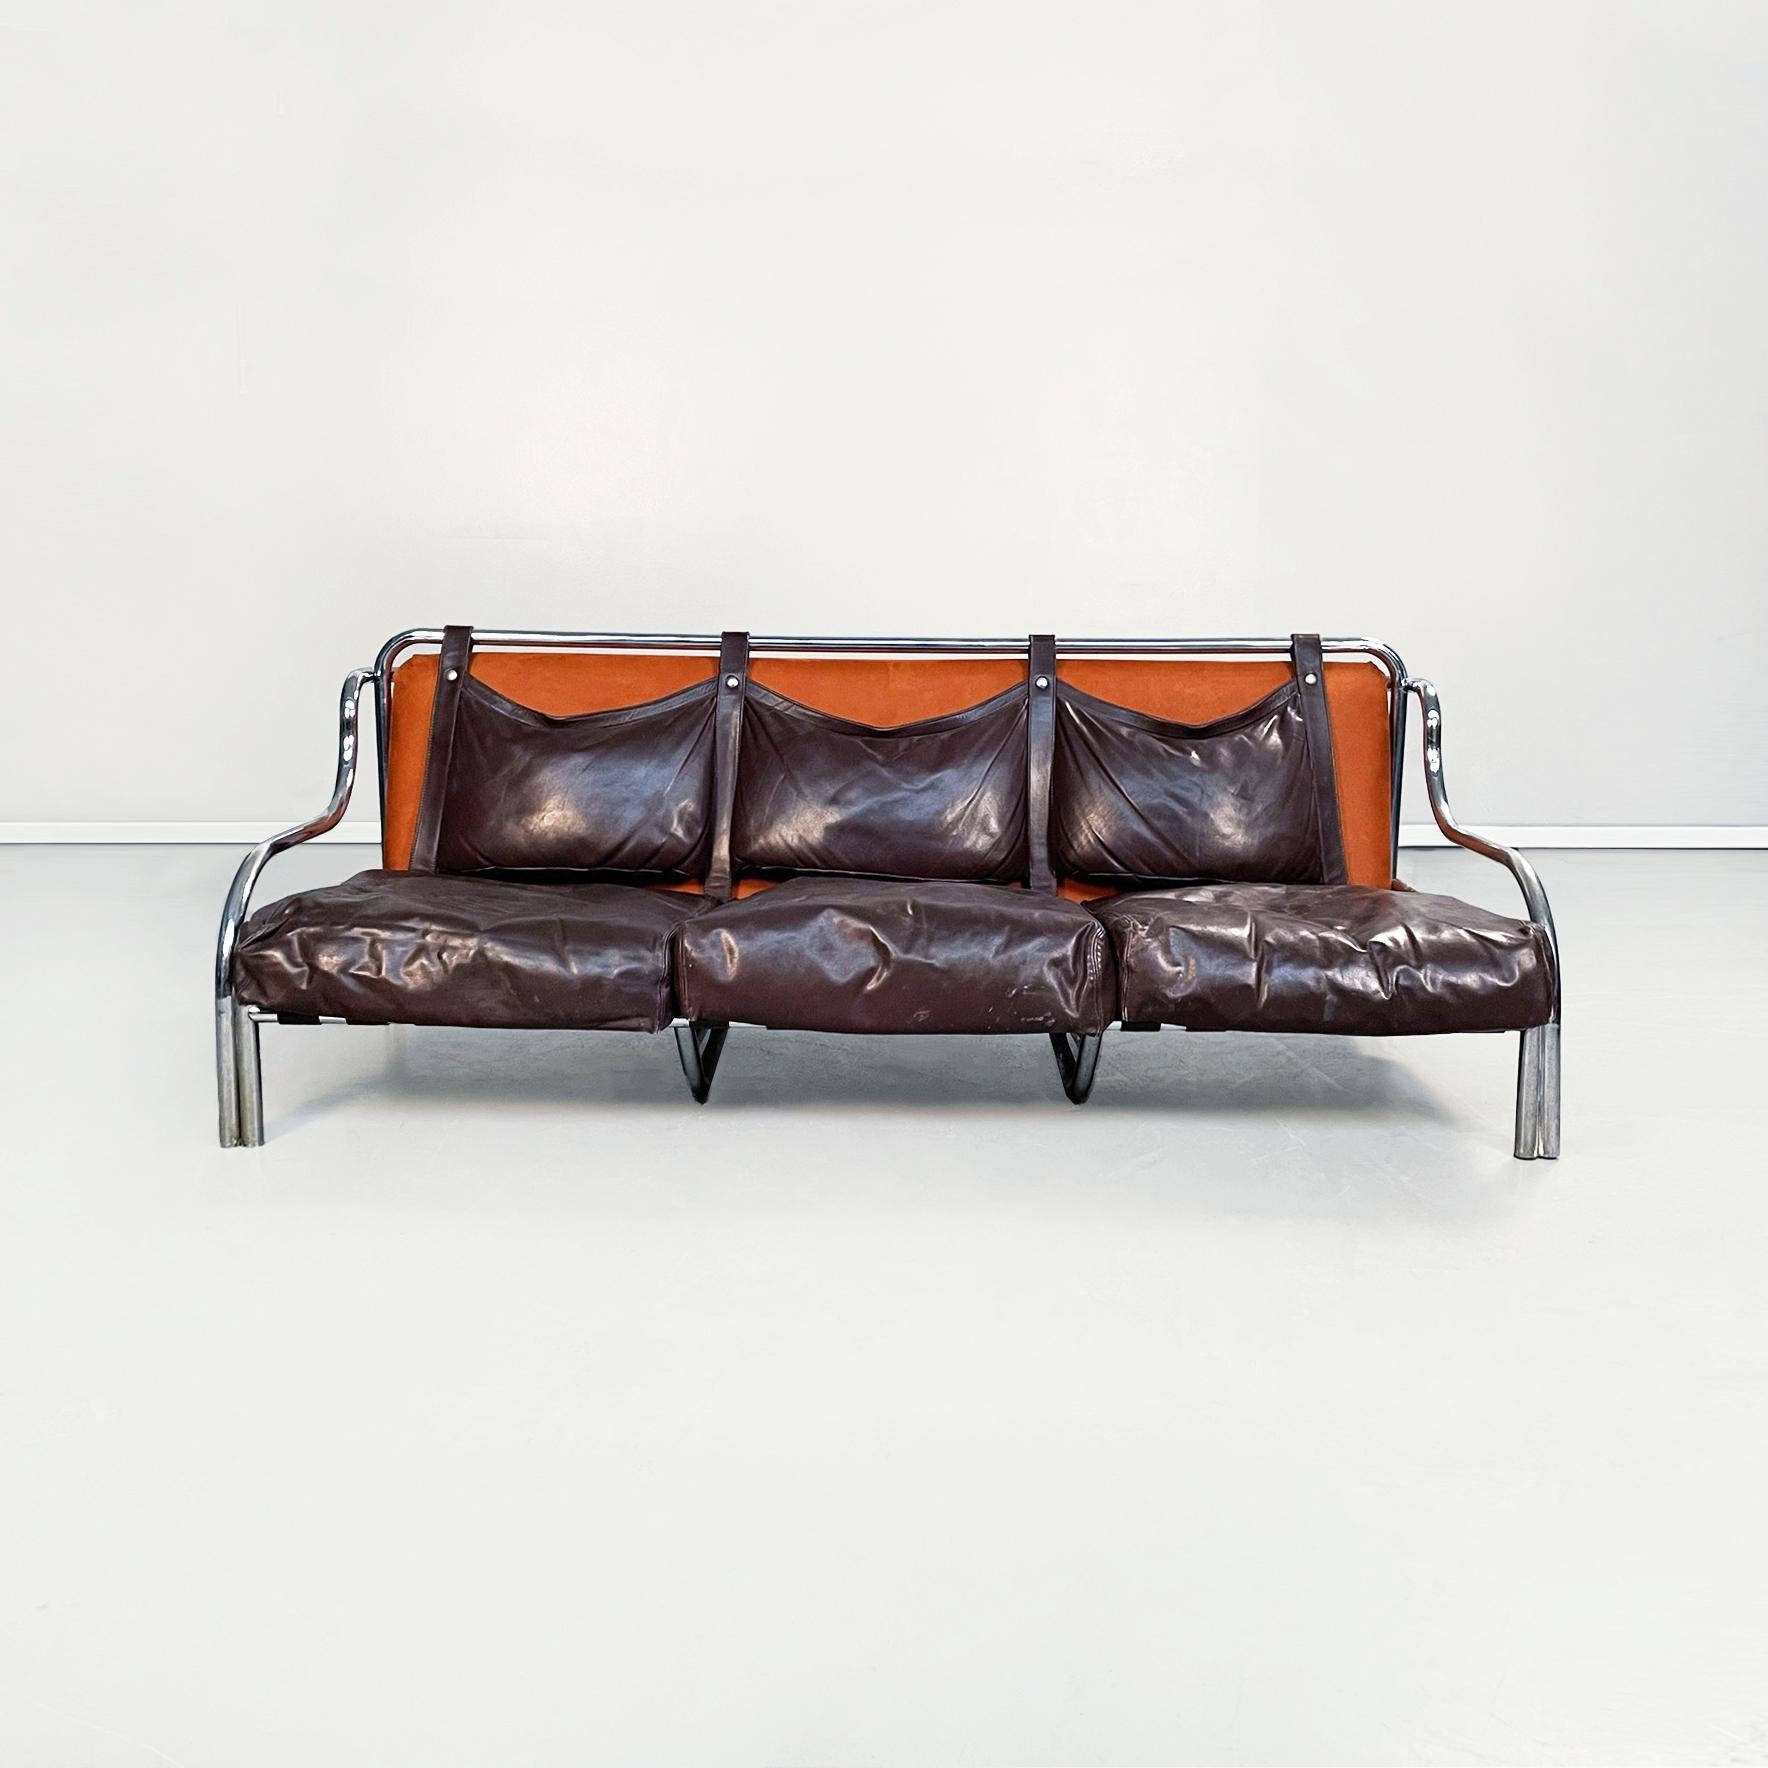 Italian mid-century leather Stringa sofa by Gae Aulenti for Poltronova, 1965
Stringa 3-seater sofa The tubular structure is in chromed metal. Brown leather cushions is tied to the orange suede backrest, while the seat is made up of brown leather